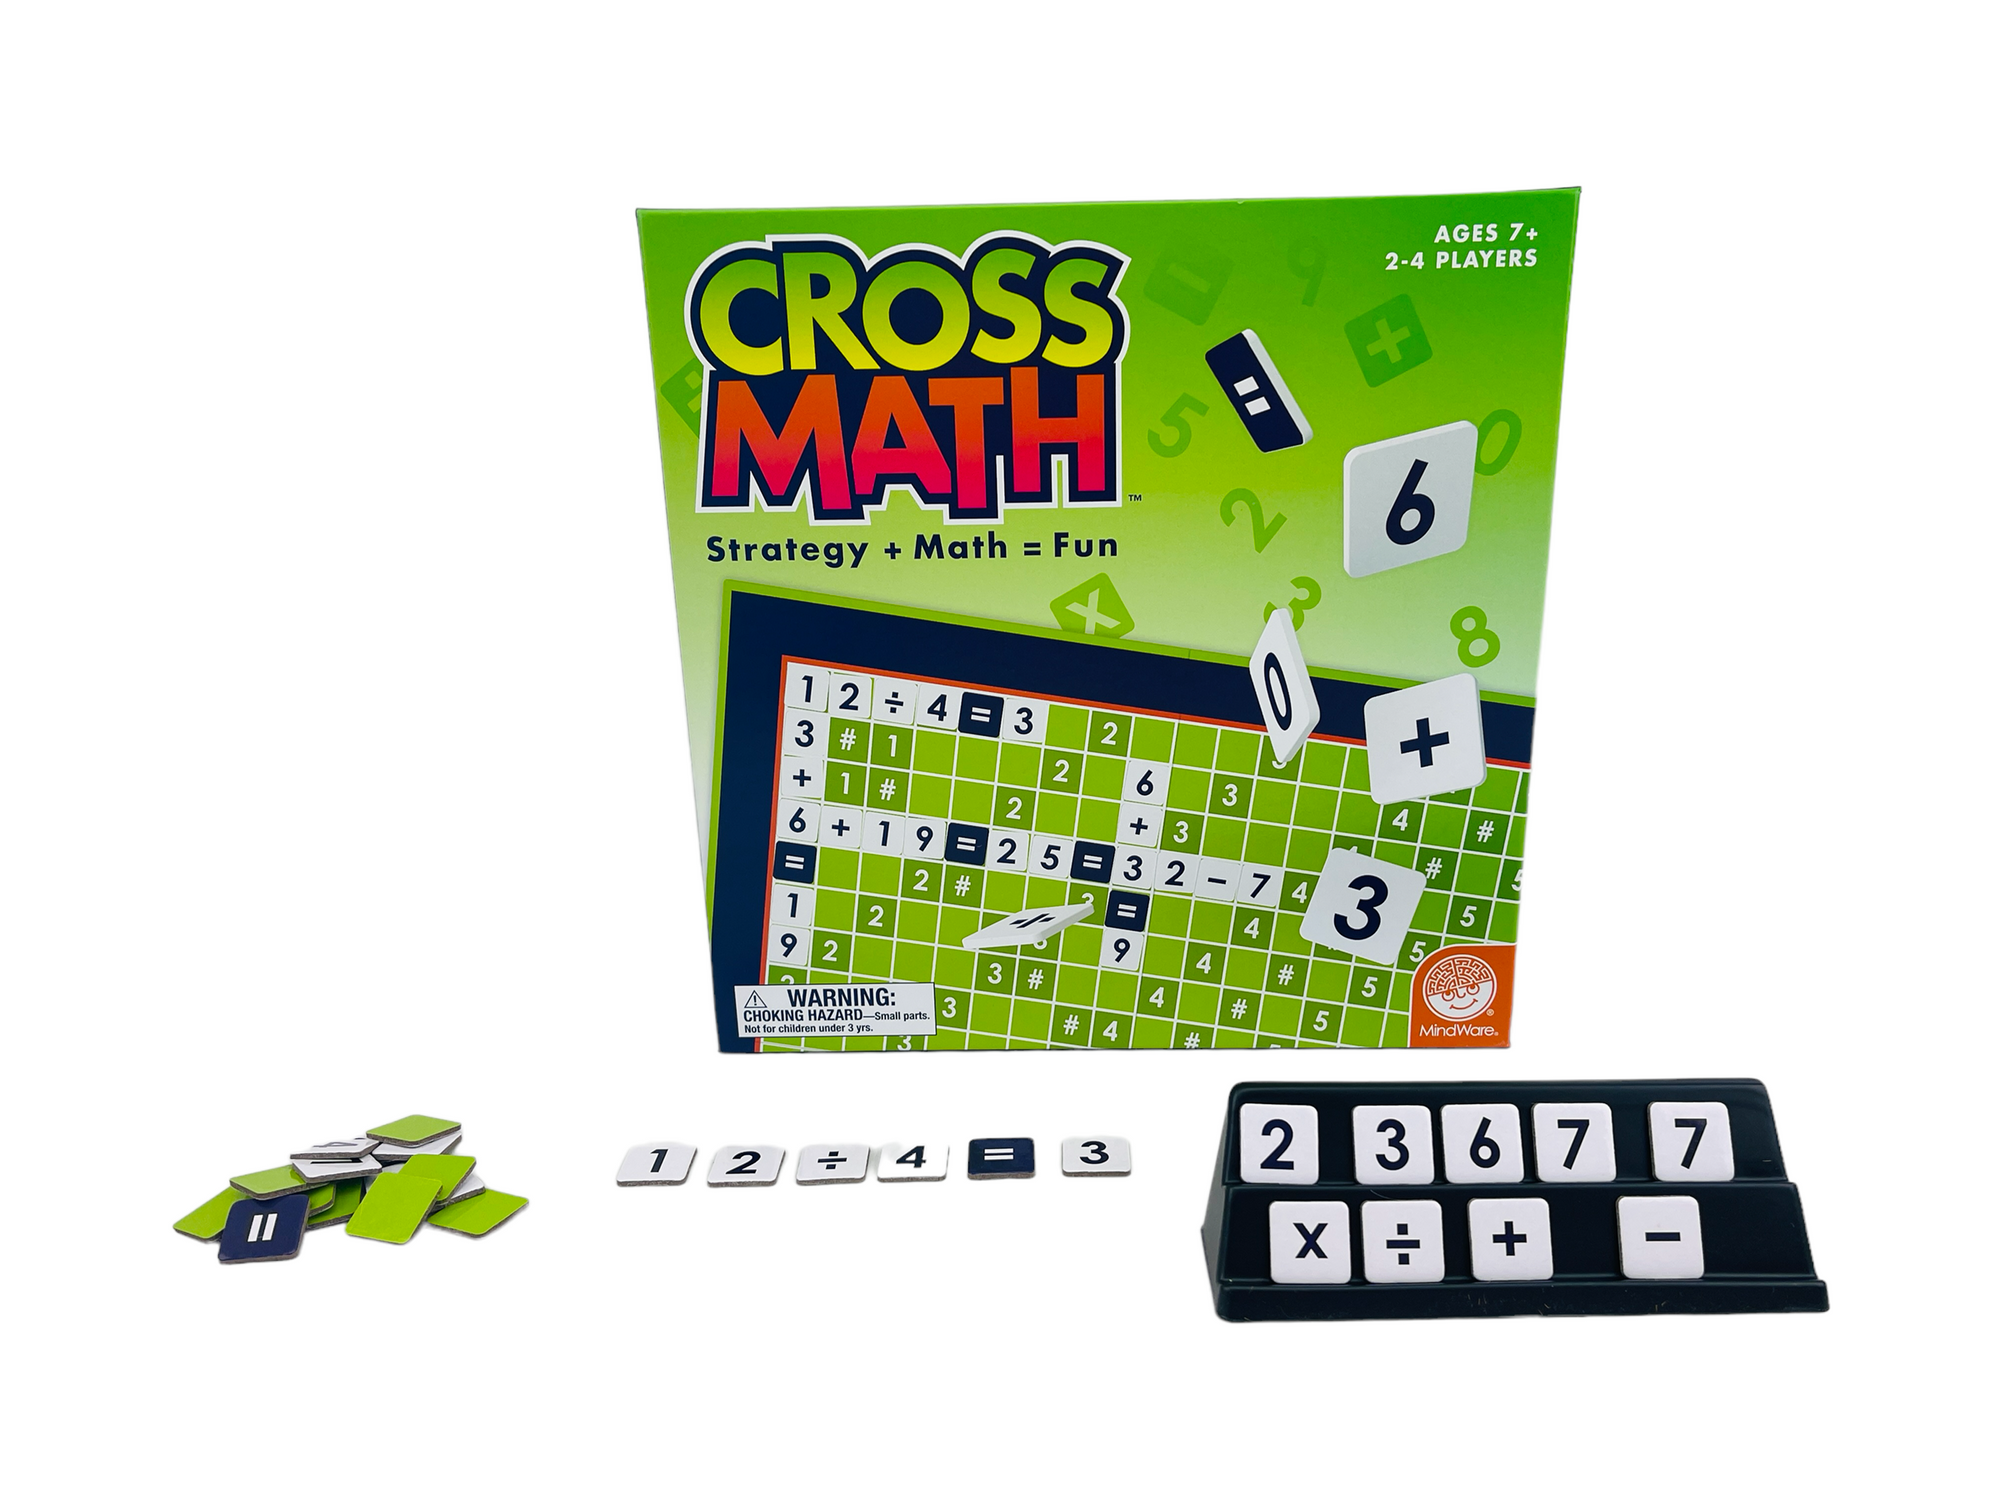 the Mindware CrossMath on display with the pieces sitting in front of the box